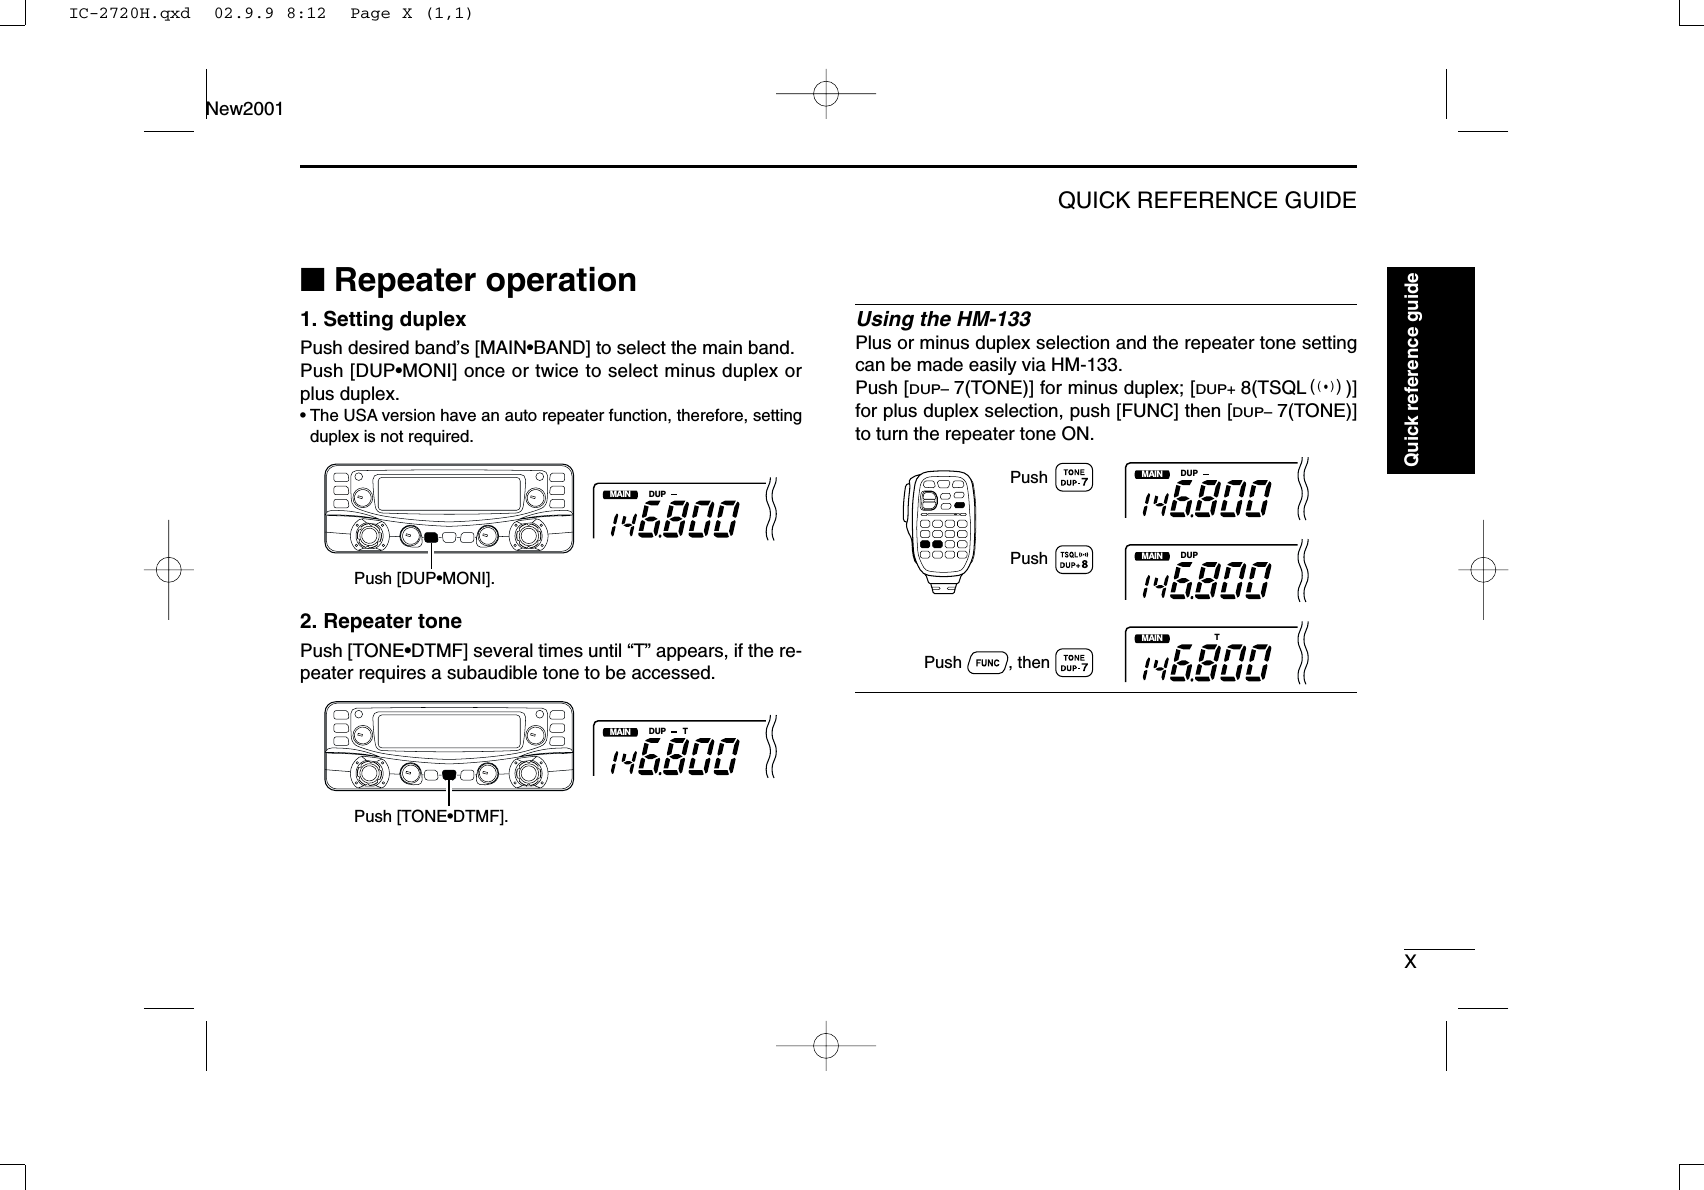 XQUICK REFERENCE GUIDENew2001■Repeater operation1. Setting duplex Push desired band’s [MAIN•BAND] to select the main band.Push [DUP•MONI] once or twice to select minus duplex orplus duplex.•The USA version have an auto repeater function, therefore, settingduplex is not required.2. Repeater tone Push [TONE•DTMF] several times until “T” appears, if the re-peater requires a subaudible tone to be accessed.Using the HM-133Plus or minus duplex selection and the repeater tone settingcan be made easily via HM-133.Push [DUP–7(TONE)] for minus duplex; [DUP+8(TSQLS)]for plus duplex selection, push [FUNC] then [DUP–7(TONE)]to turn the repeater tone ON.MAINT  XDUPMAINT  XDUPMAINT  XTPushPush          , then PushMAINT  XDUP TPush [TONE•DTMF].MAINT  XDUPPush [DUP•MONI].Quick reference guideIC-2720H.qxd  02.9.9 8:12  Page X (1,1)